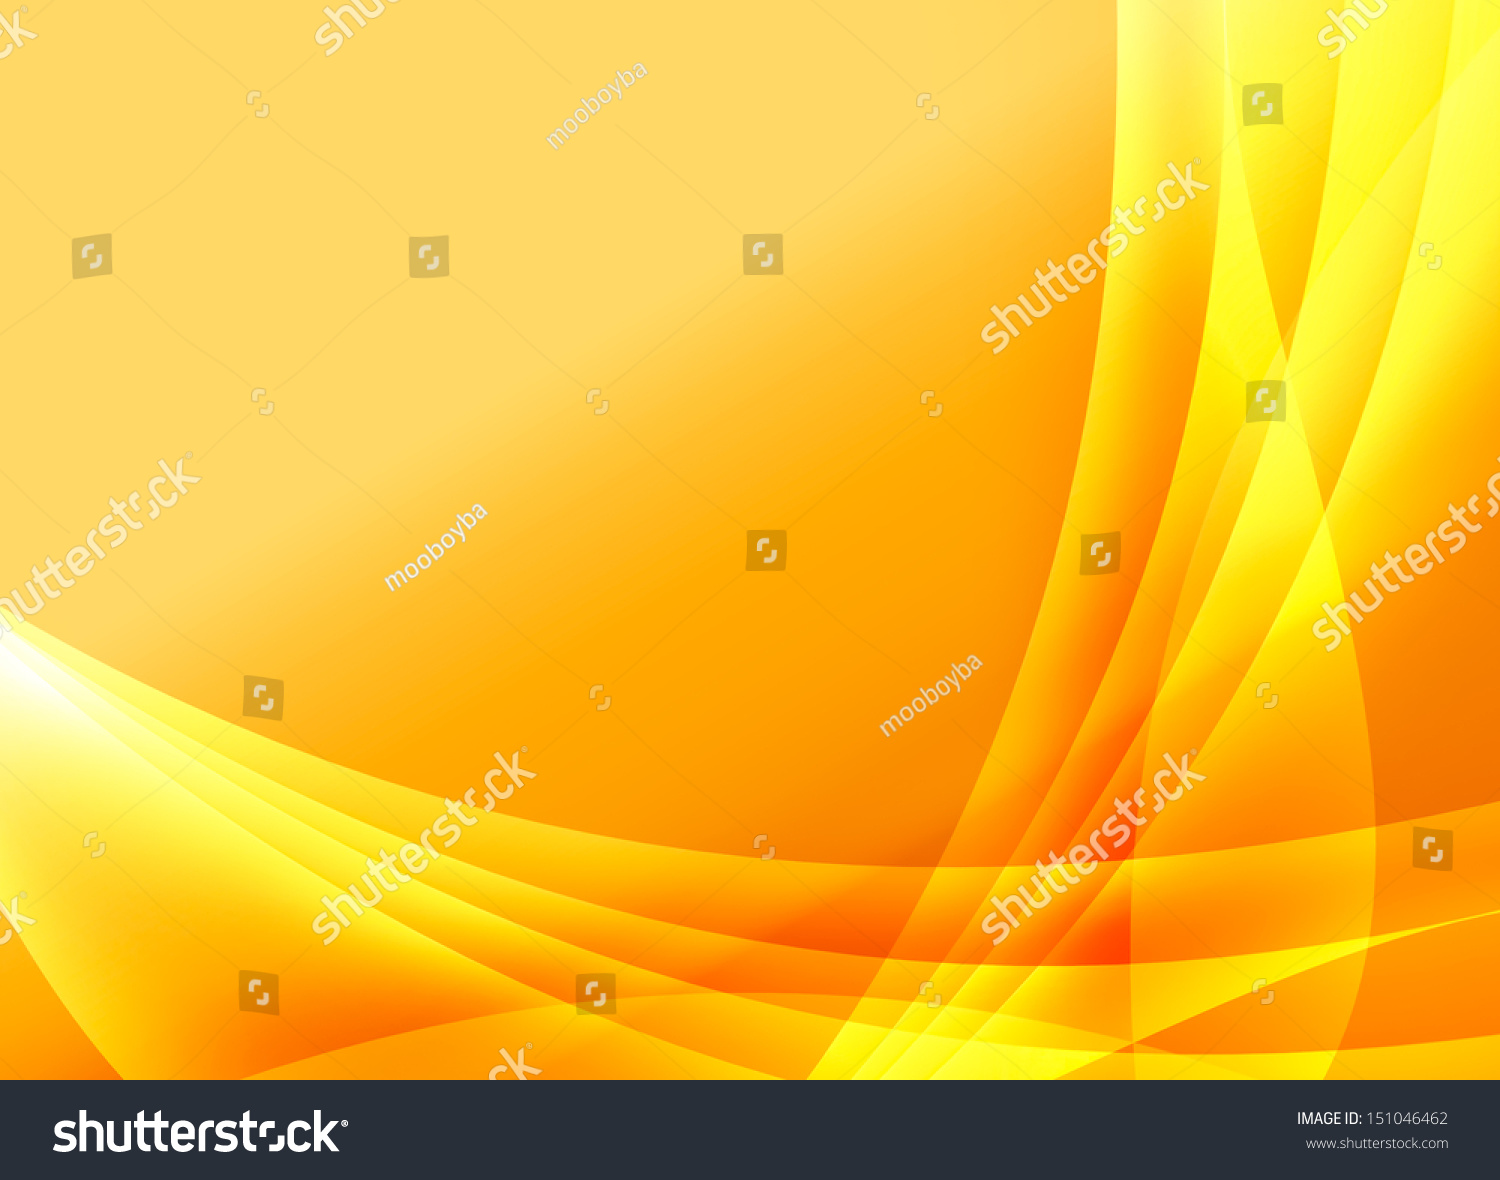 Abstract Yellow Background Stock Photo 151046462 : Shutterstock